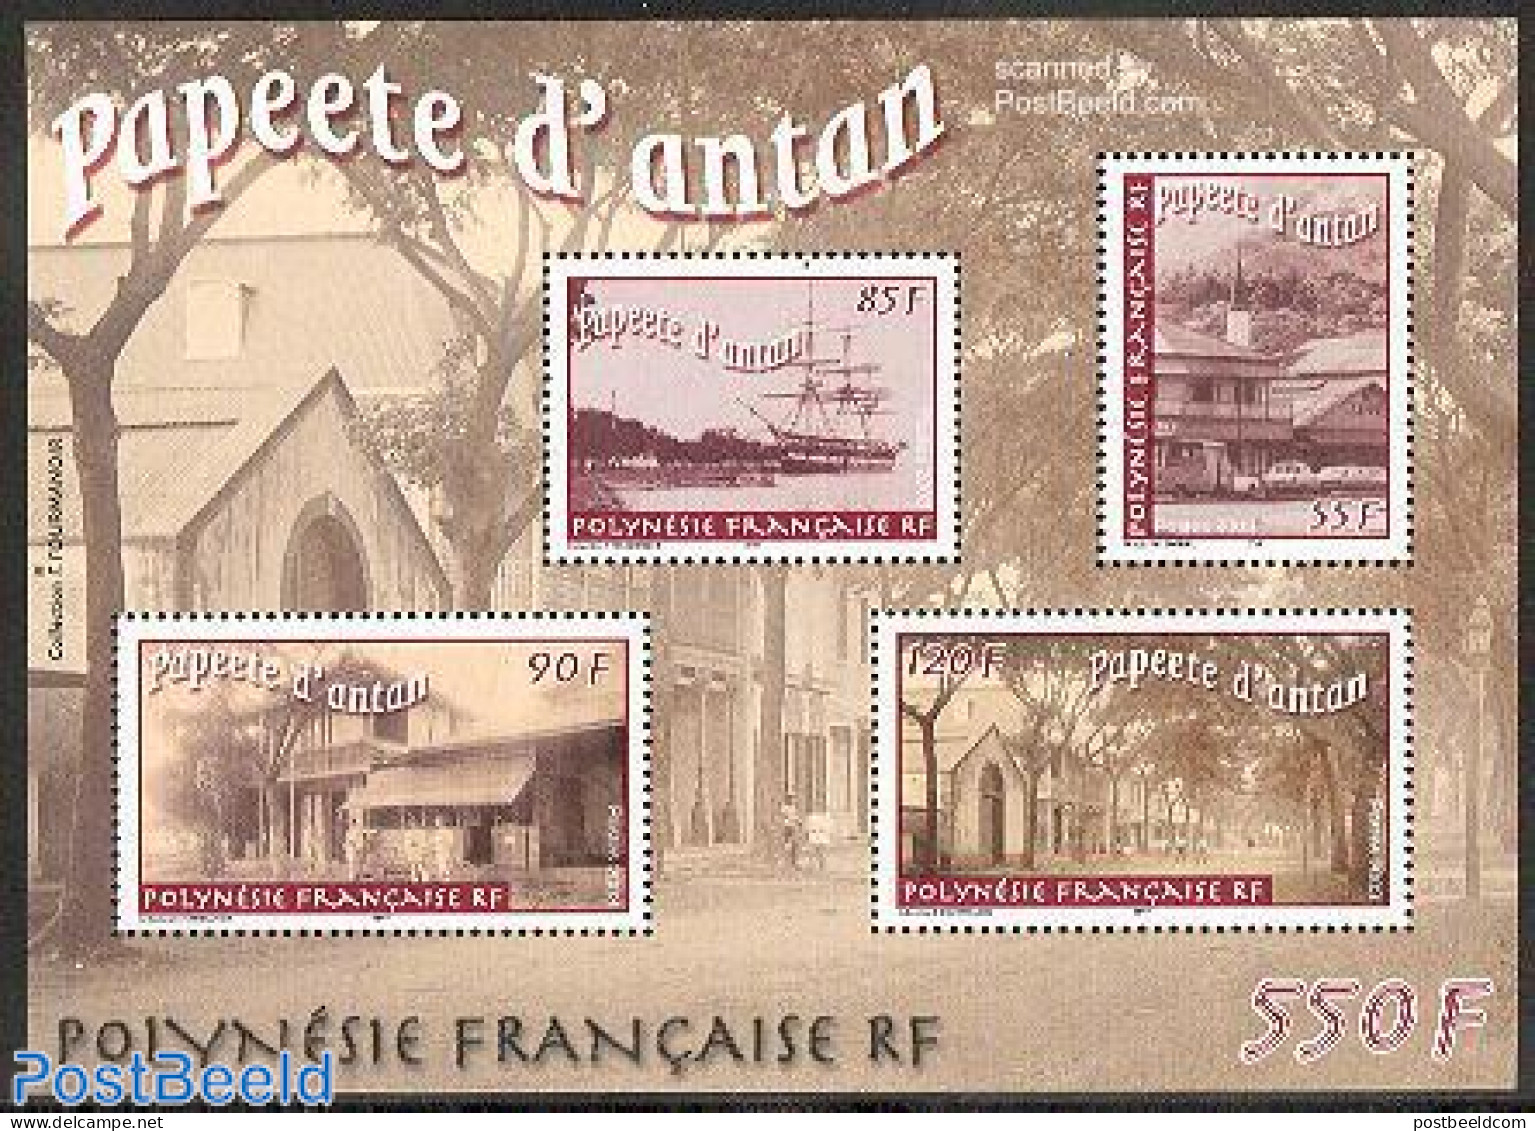 French Polynesia 2003 Papeete In The Past S/s, Mint NH, Sport - Transport - Cycling - Automobiles - Ships And Boats - Ungebraucht